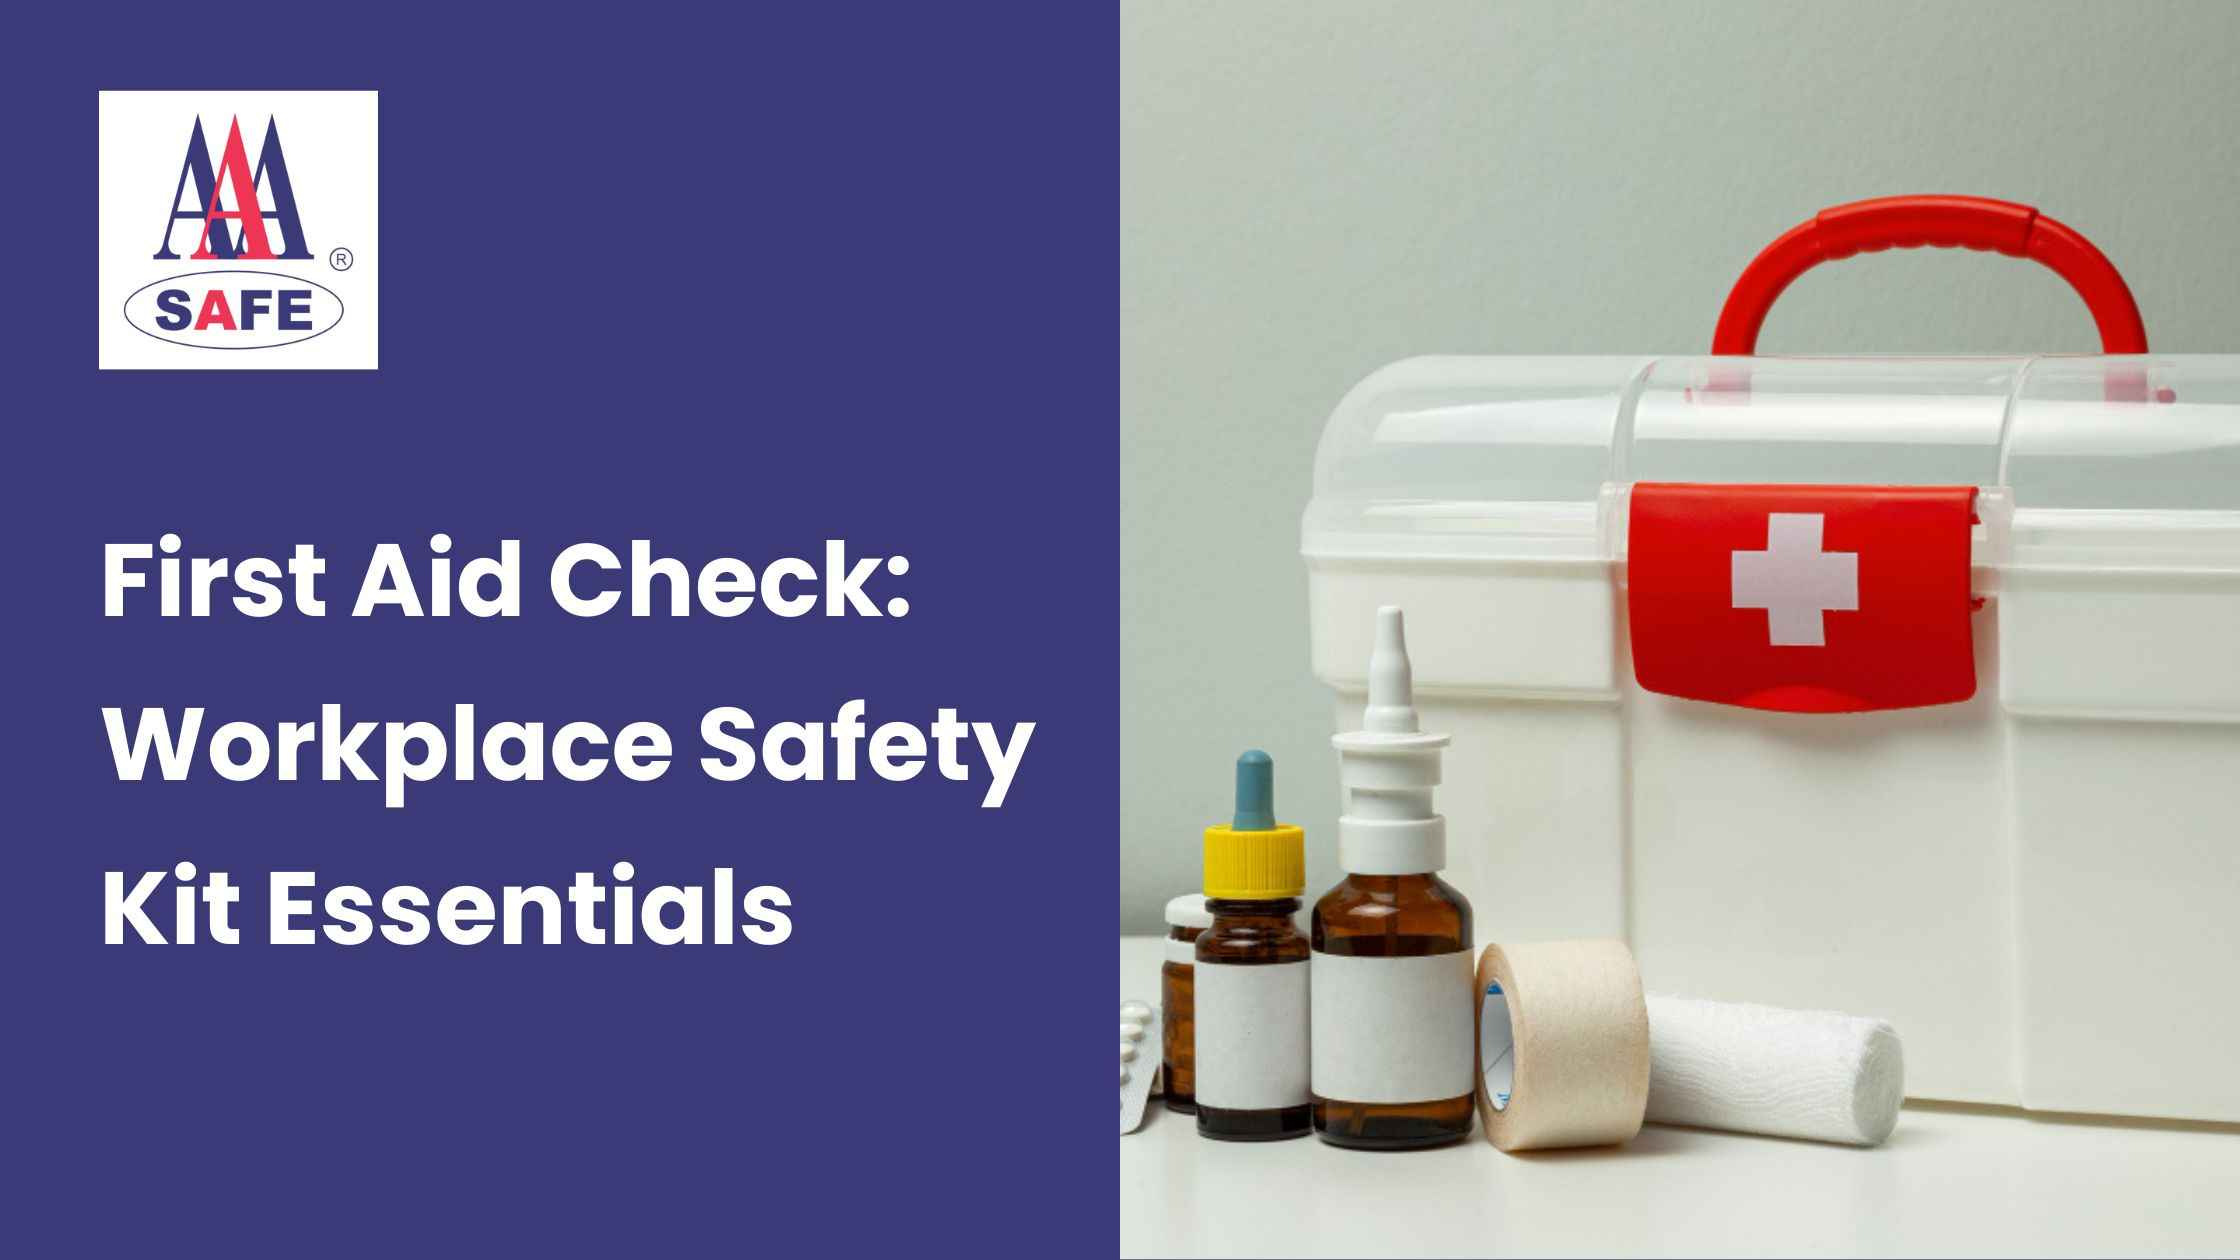 First Aid Check: Workplace Safety Kit Essentials